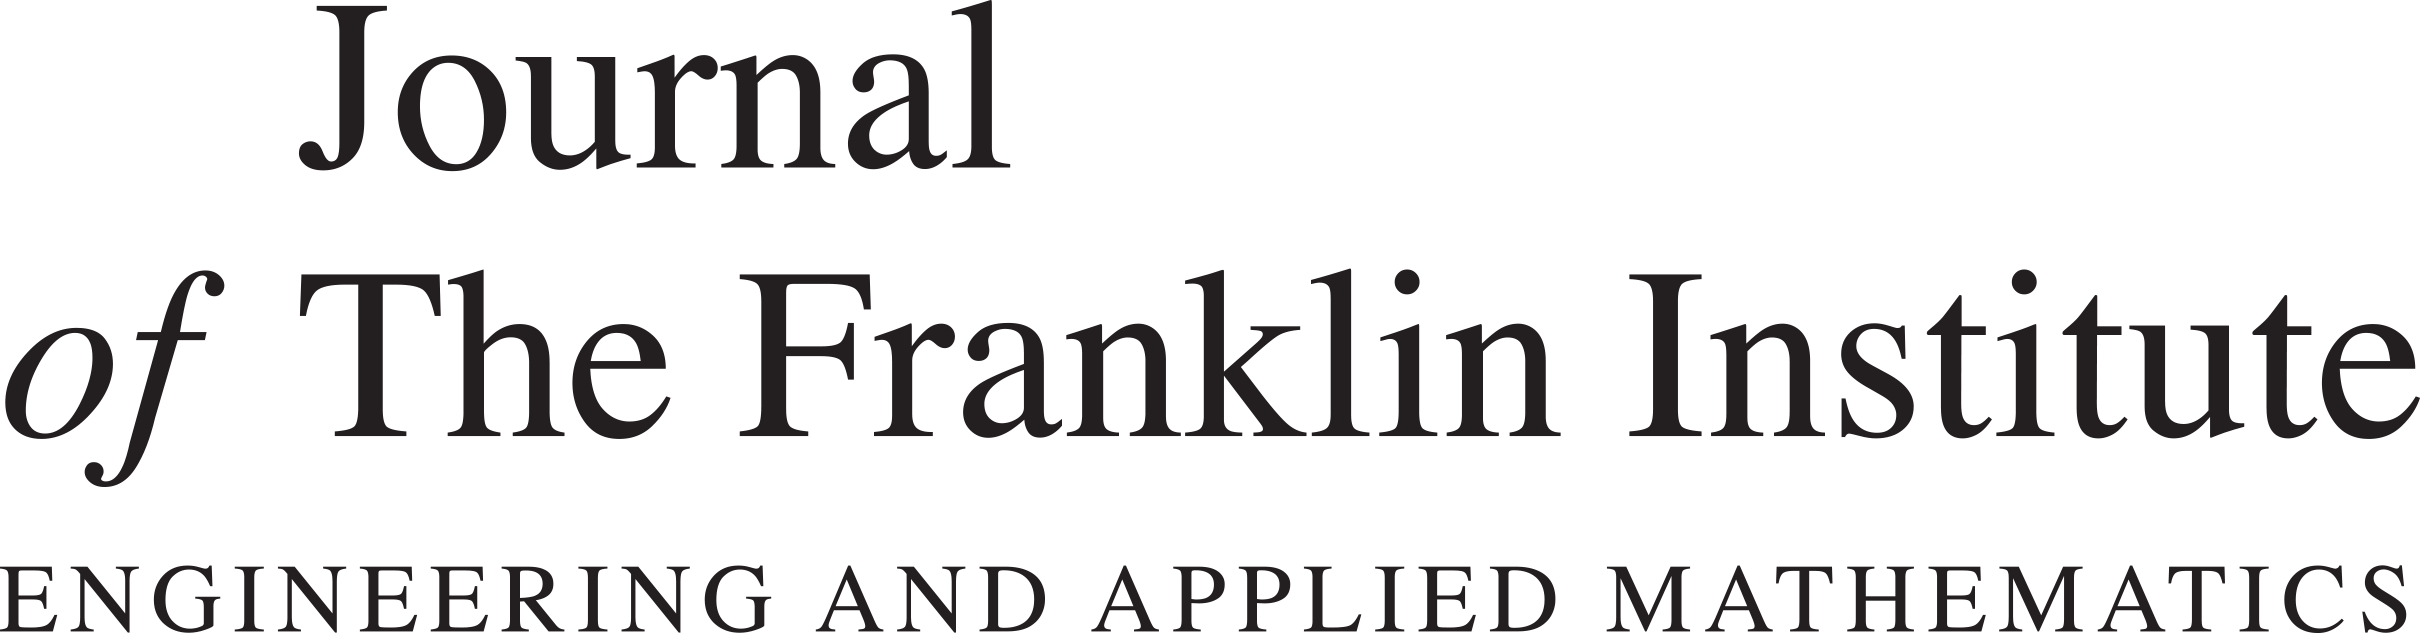 Logo for the Journal of The Franklin Institute